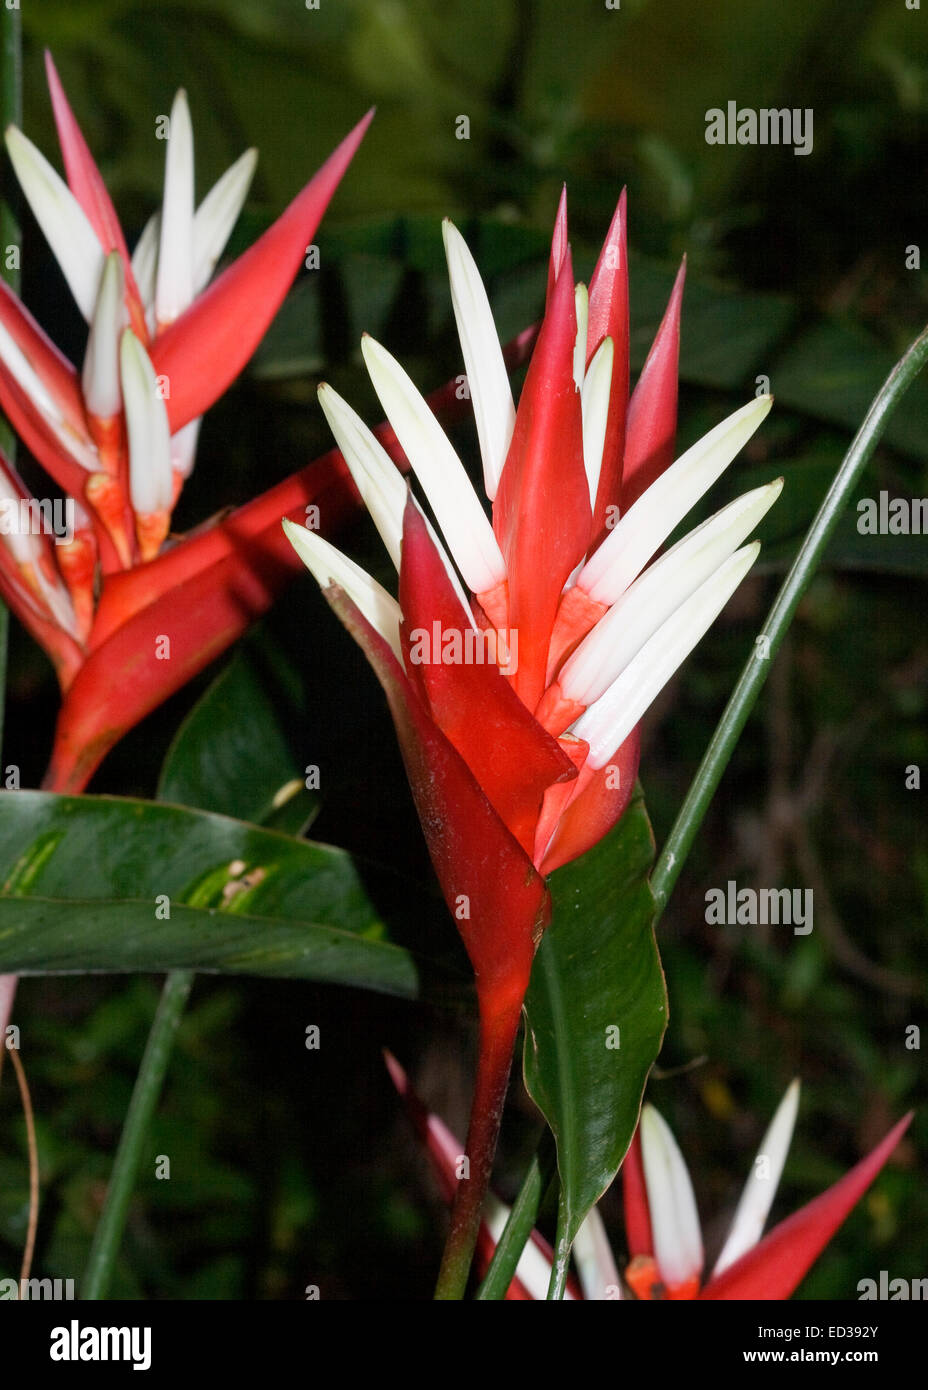 Unusual vivid red & white flowers / bracts of Heliconia angusta vellozo cultivar Red Christmas with backgrd of dark green leaves Stock Photo